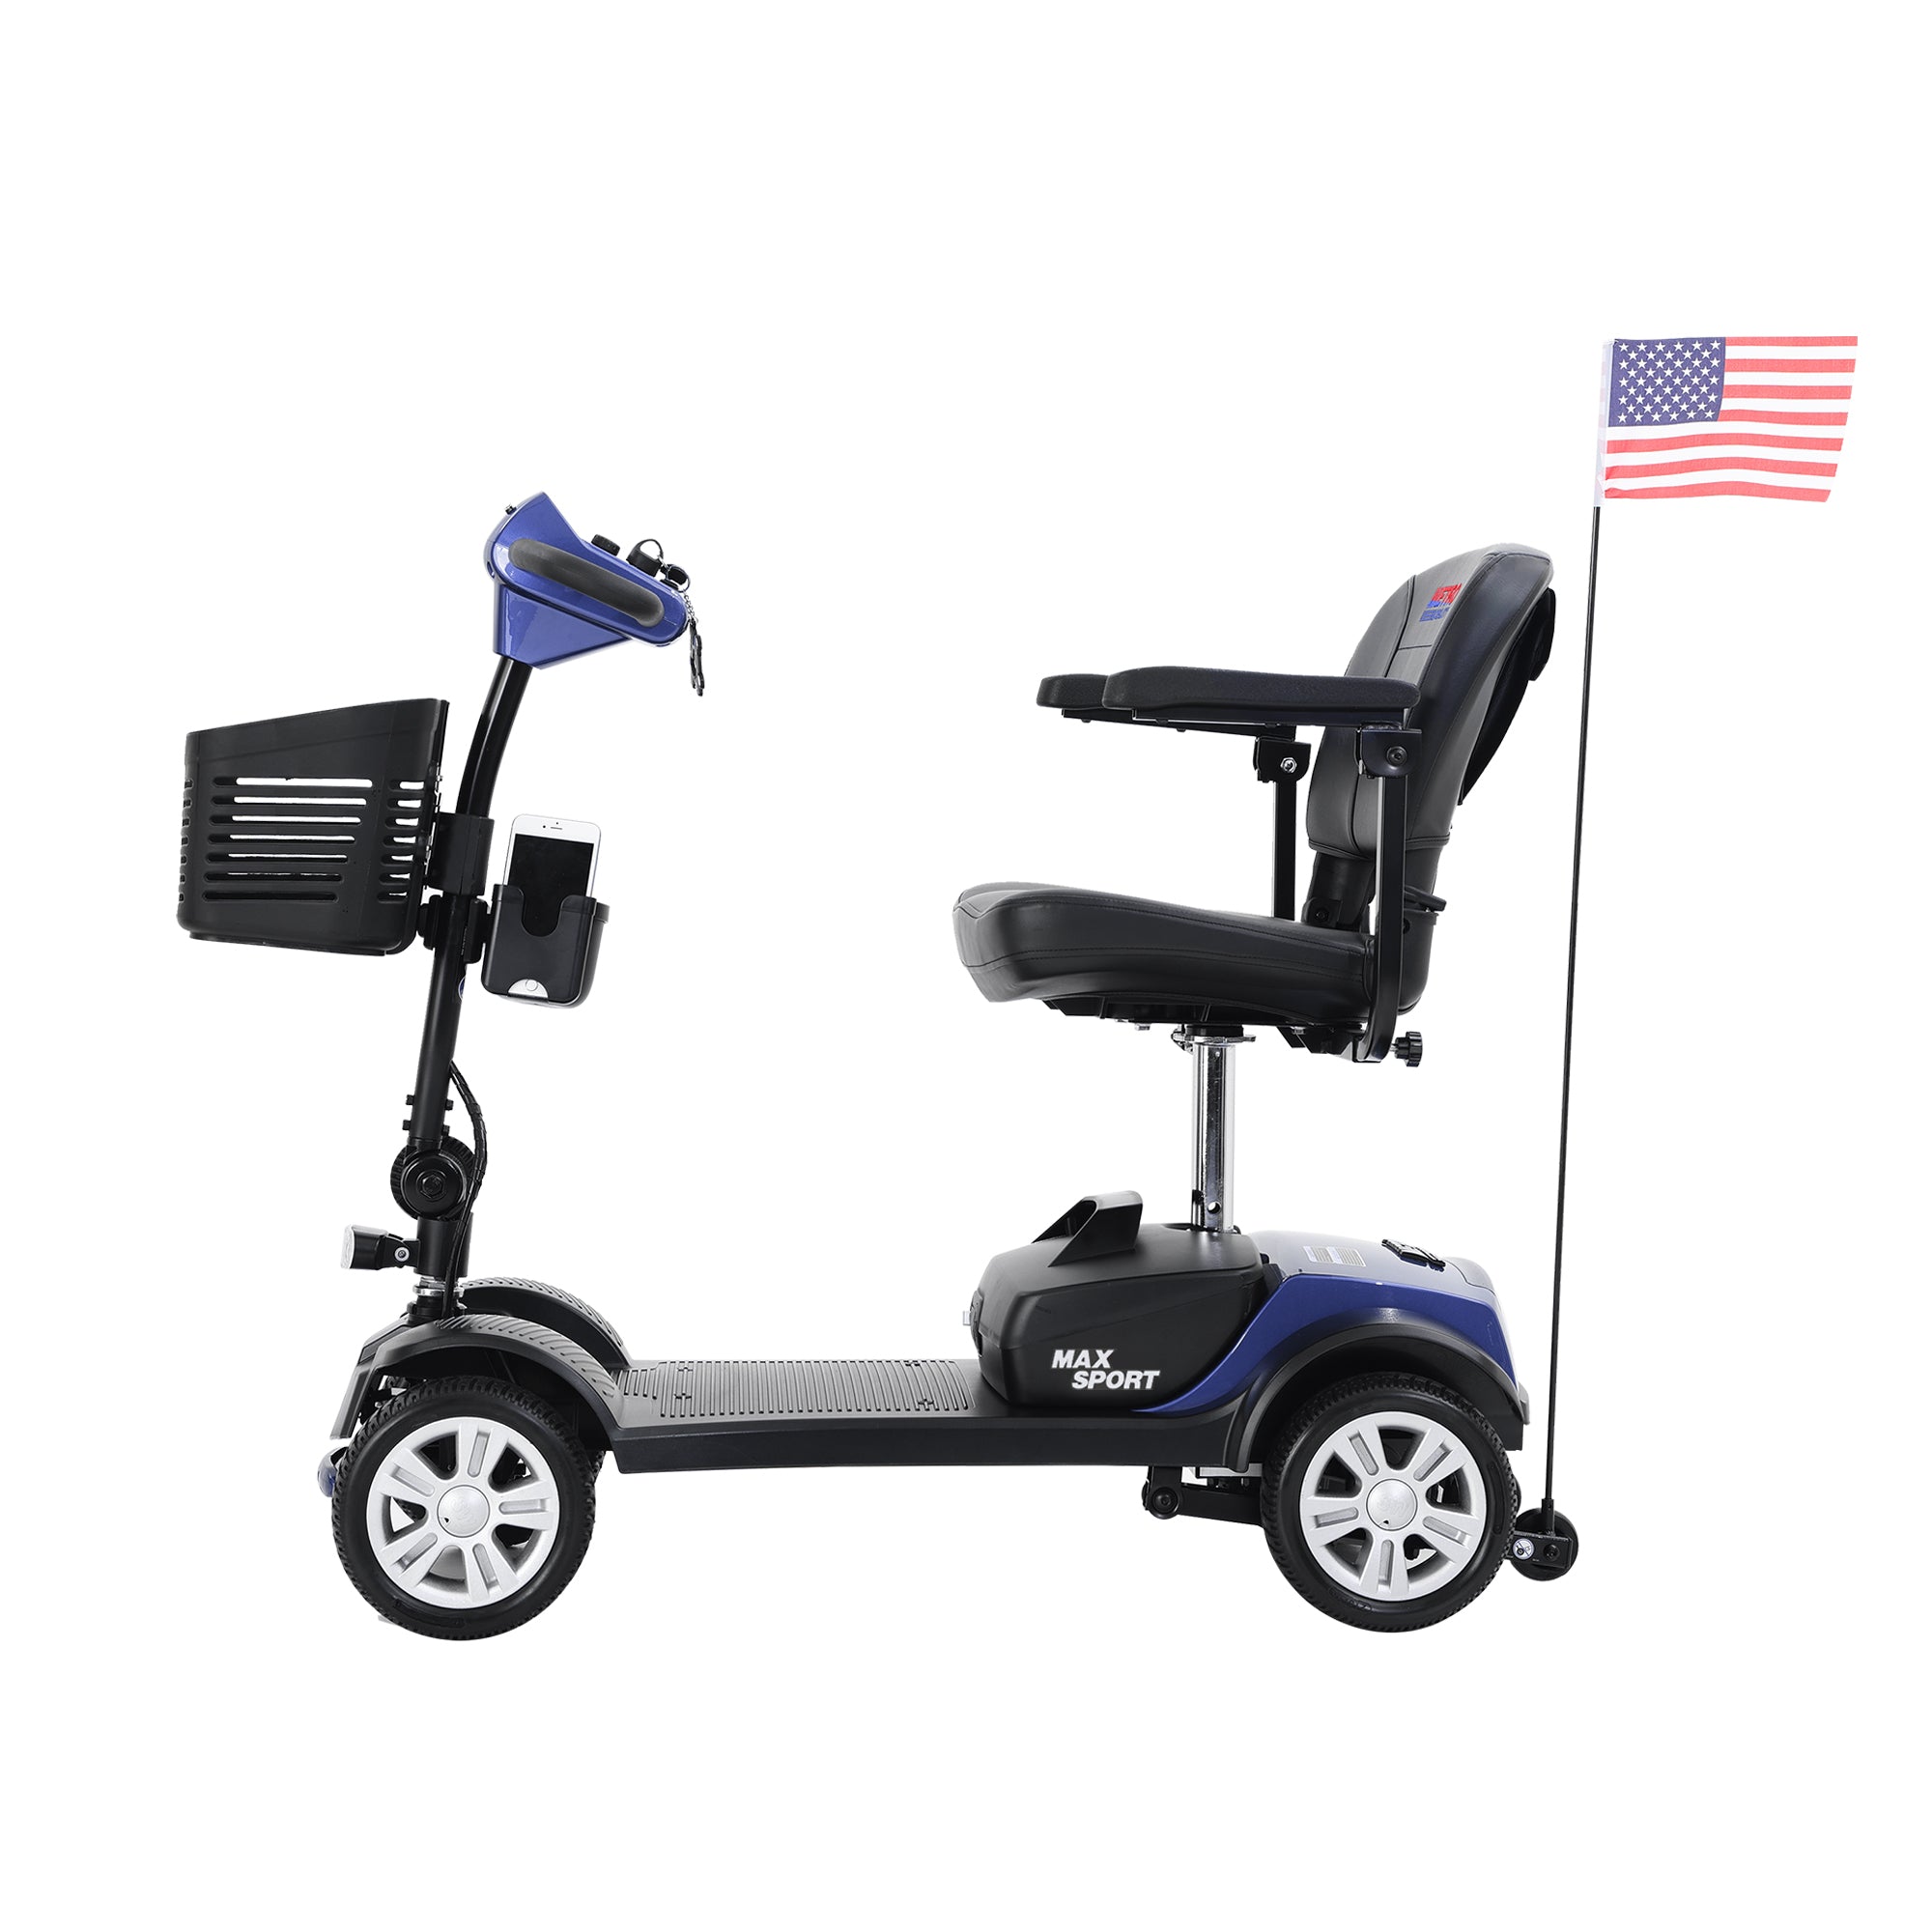 Tomshoo SPORT BLUE 4 Wheels Outdoor Compact Mobility Scooter with 2 in 1 Cup & Phone Holder